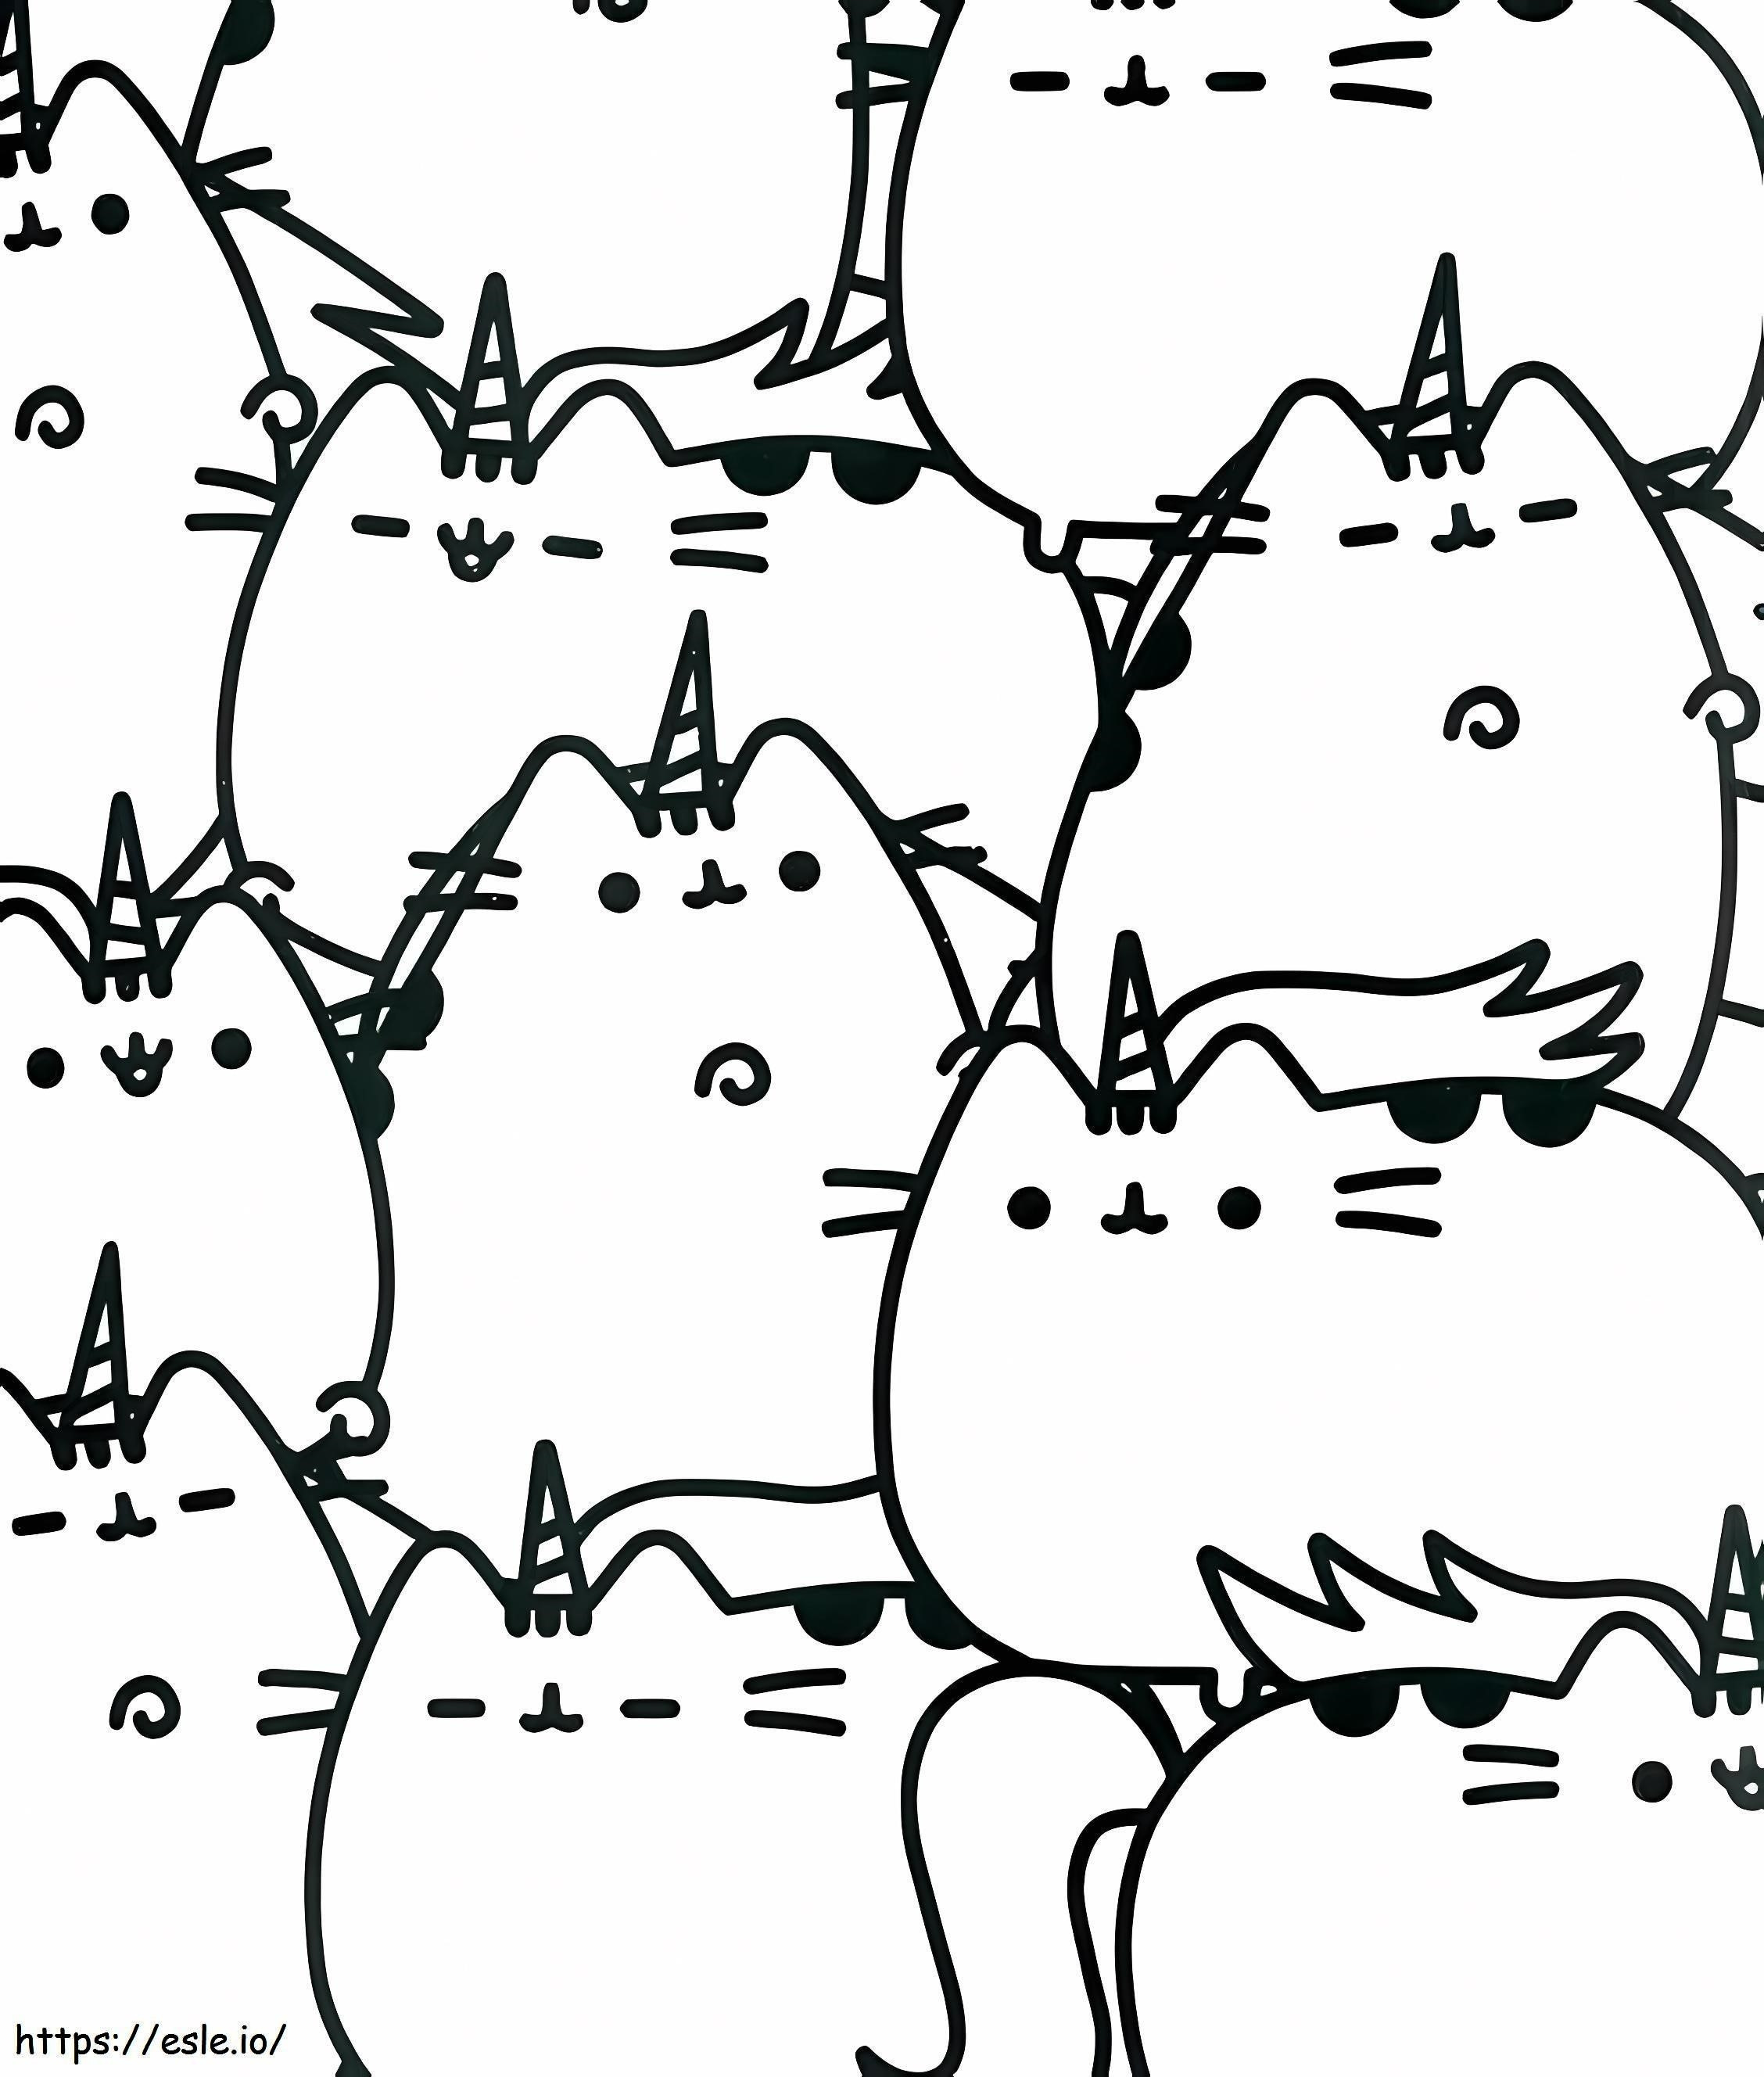 1541488448 Cat Of Also Cat Caterpillar To Print coloring page